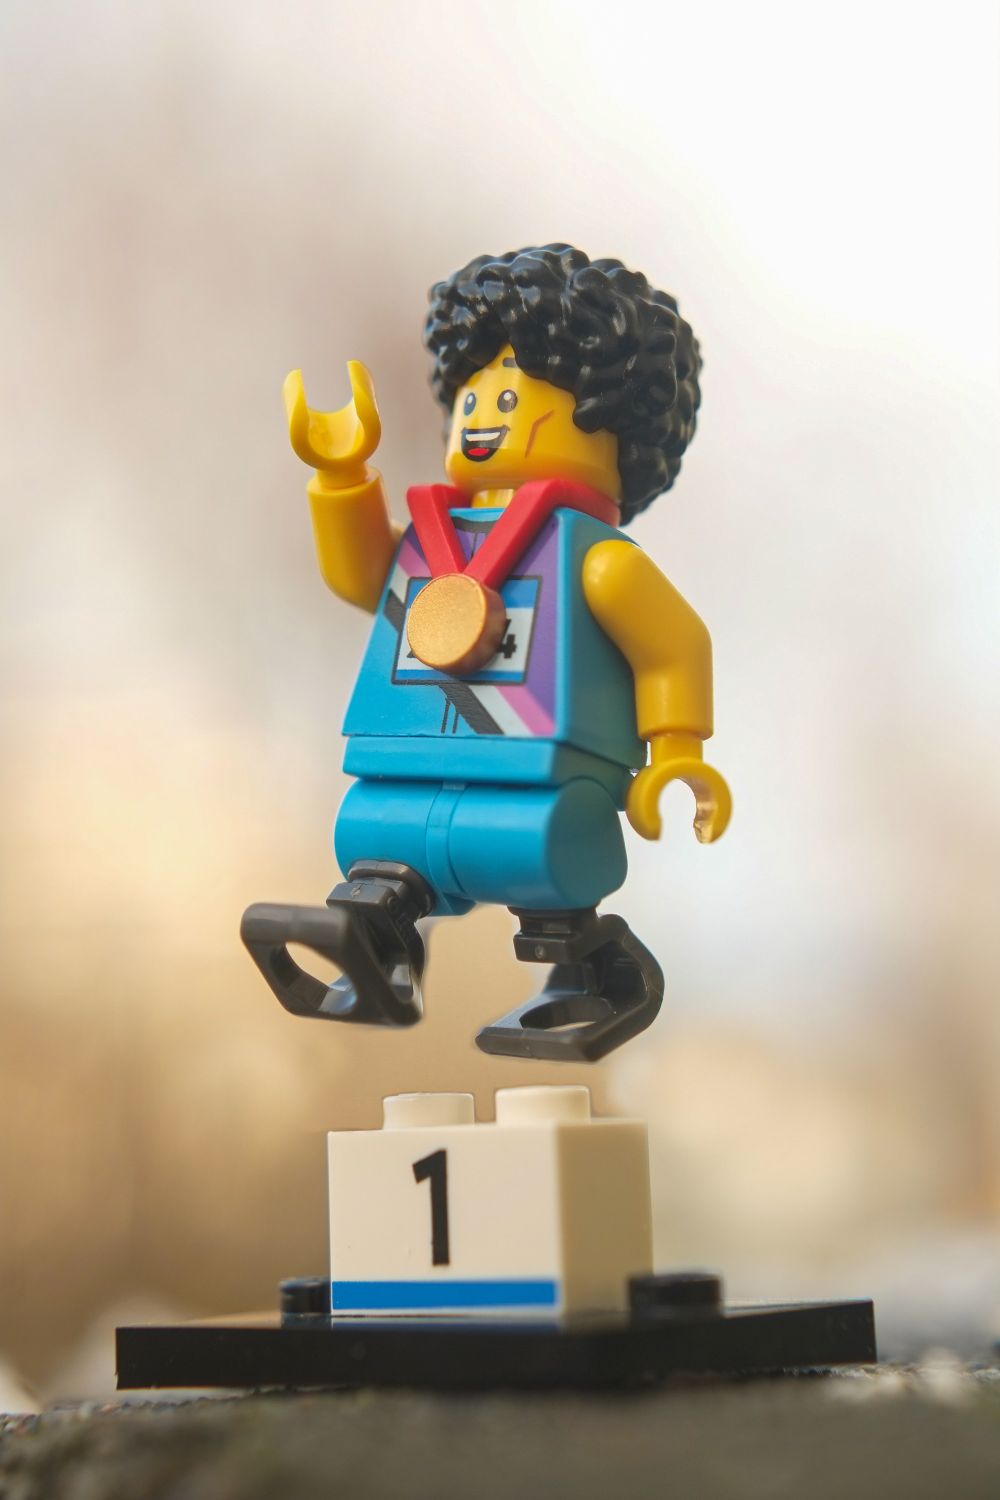 A LEGO paralympic athlete with prosthetic legs and medal on his neck is jumping over the podium.